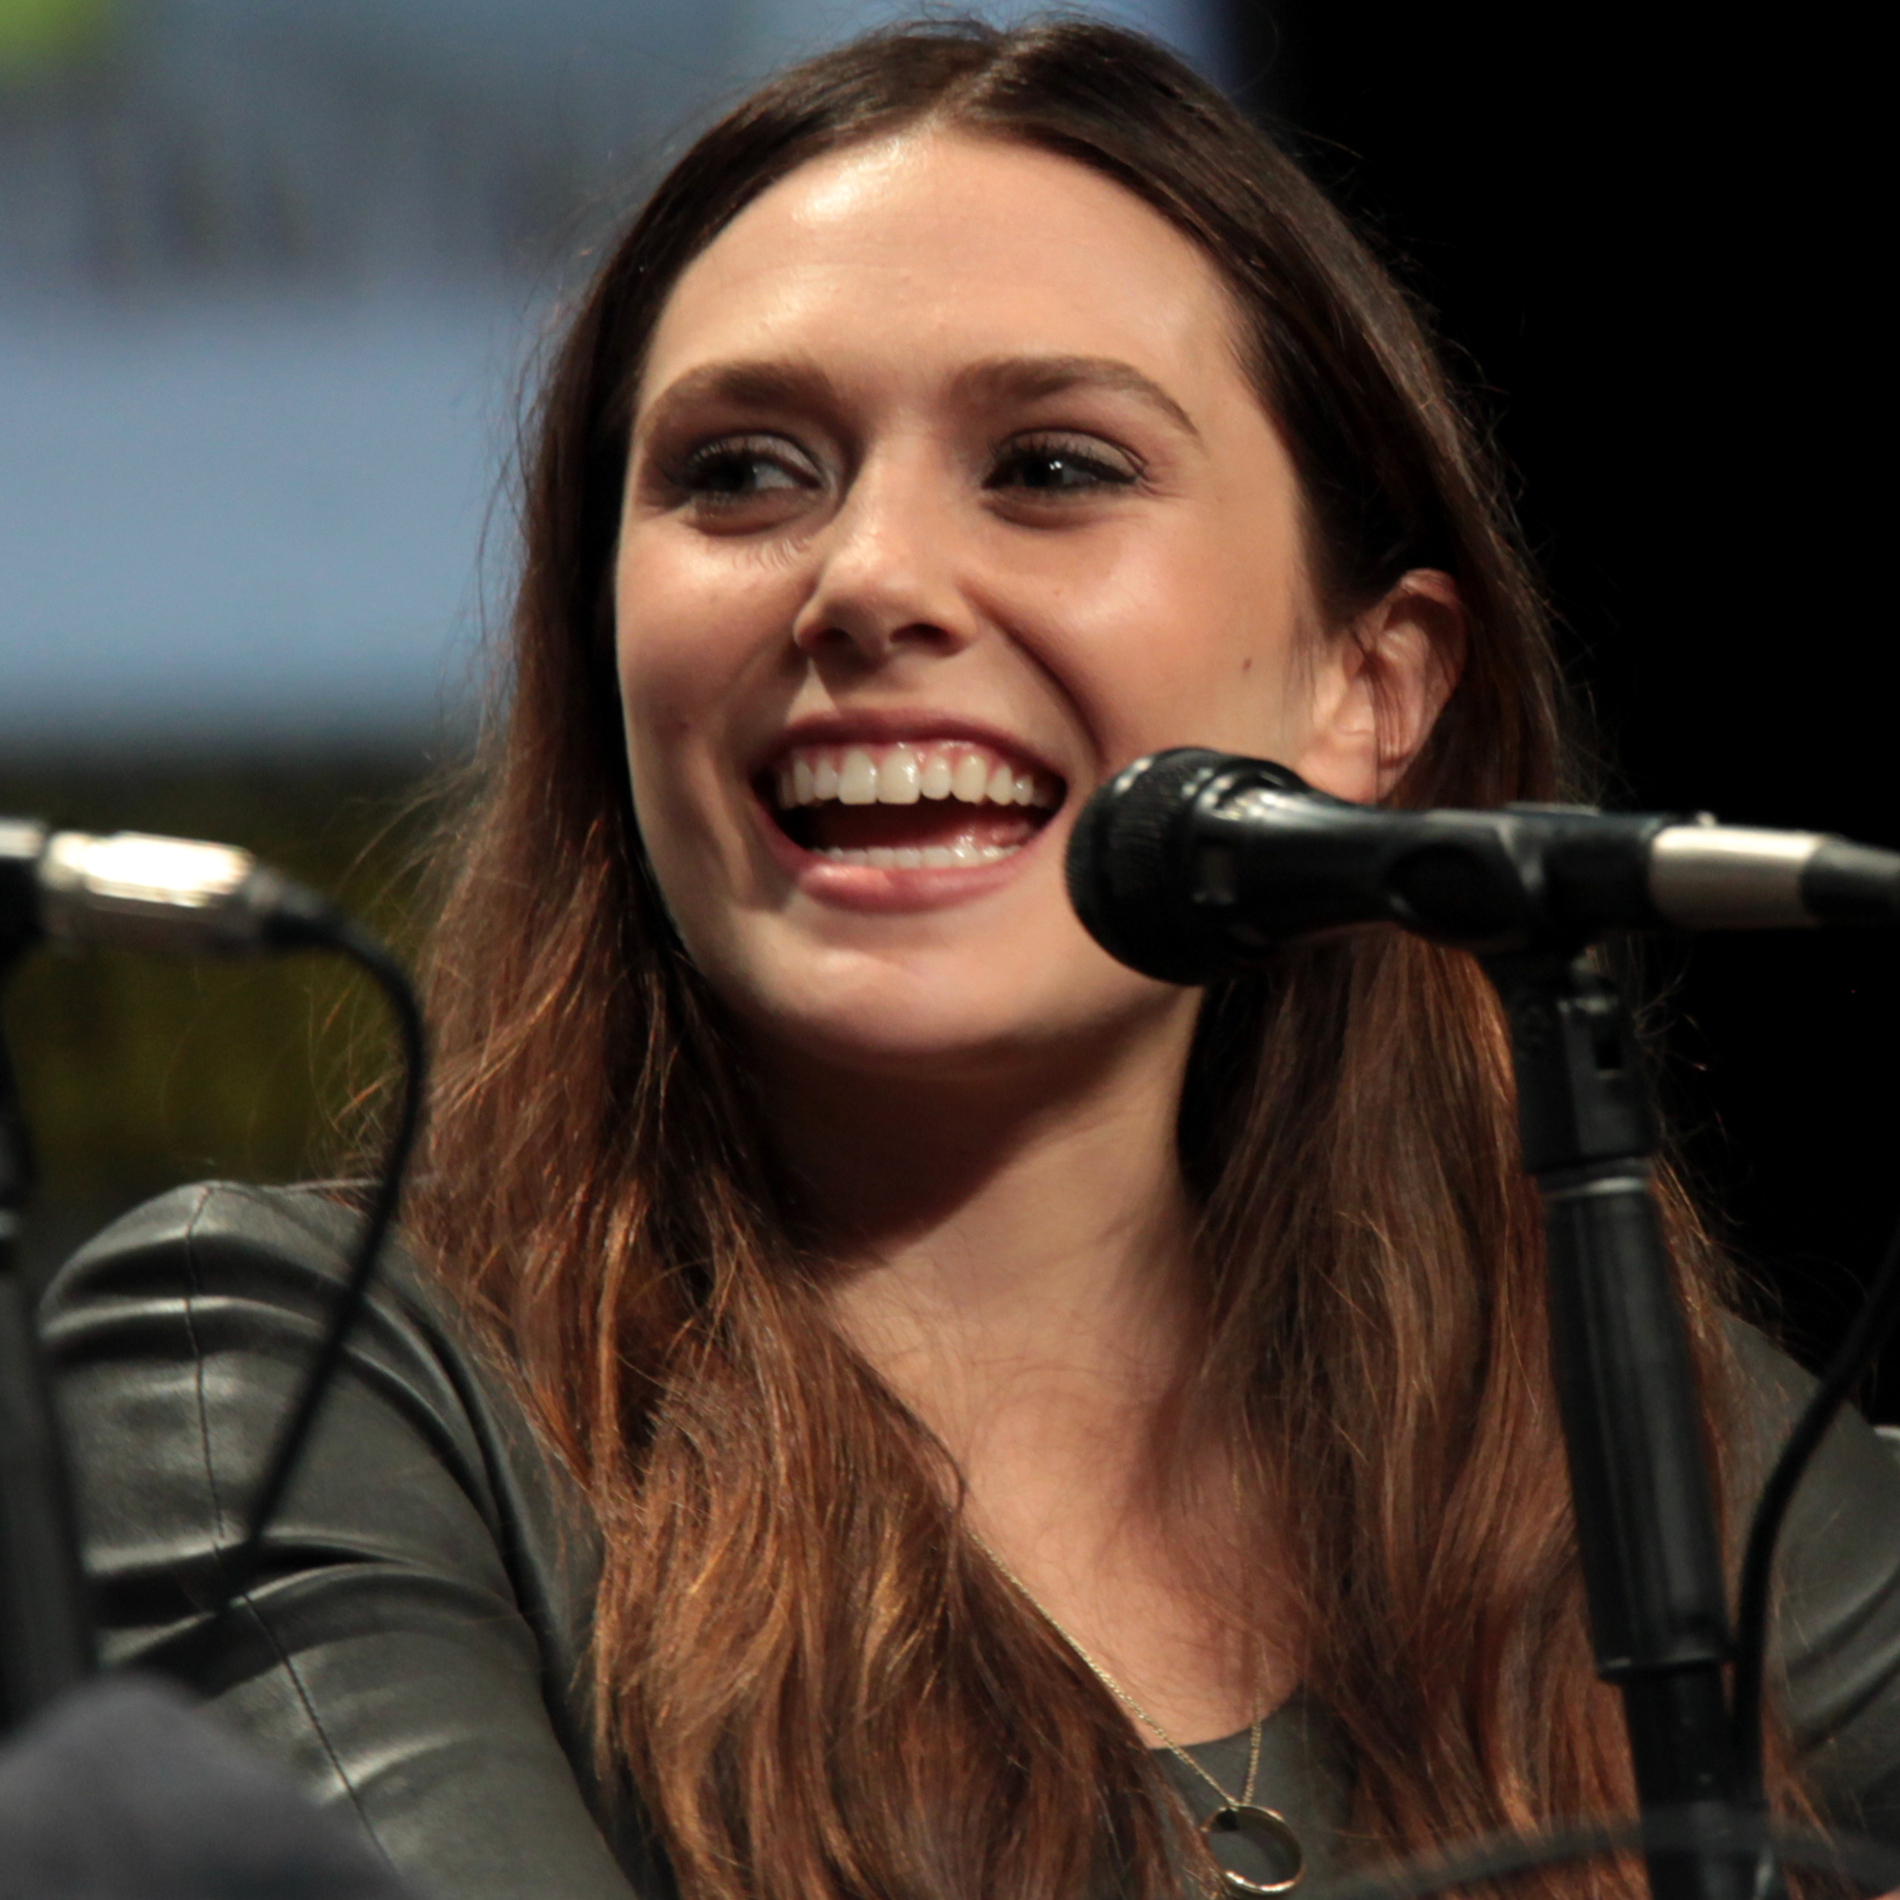 Elizabeth Olsen to star in Nicole Kidman-produced HBO Max series 'Love and Death'